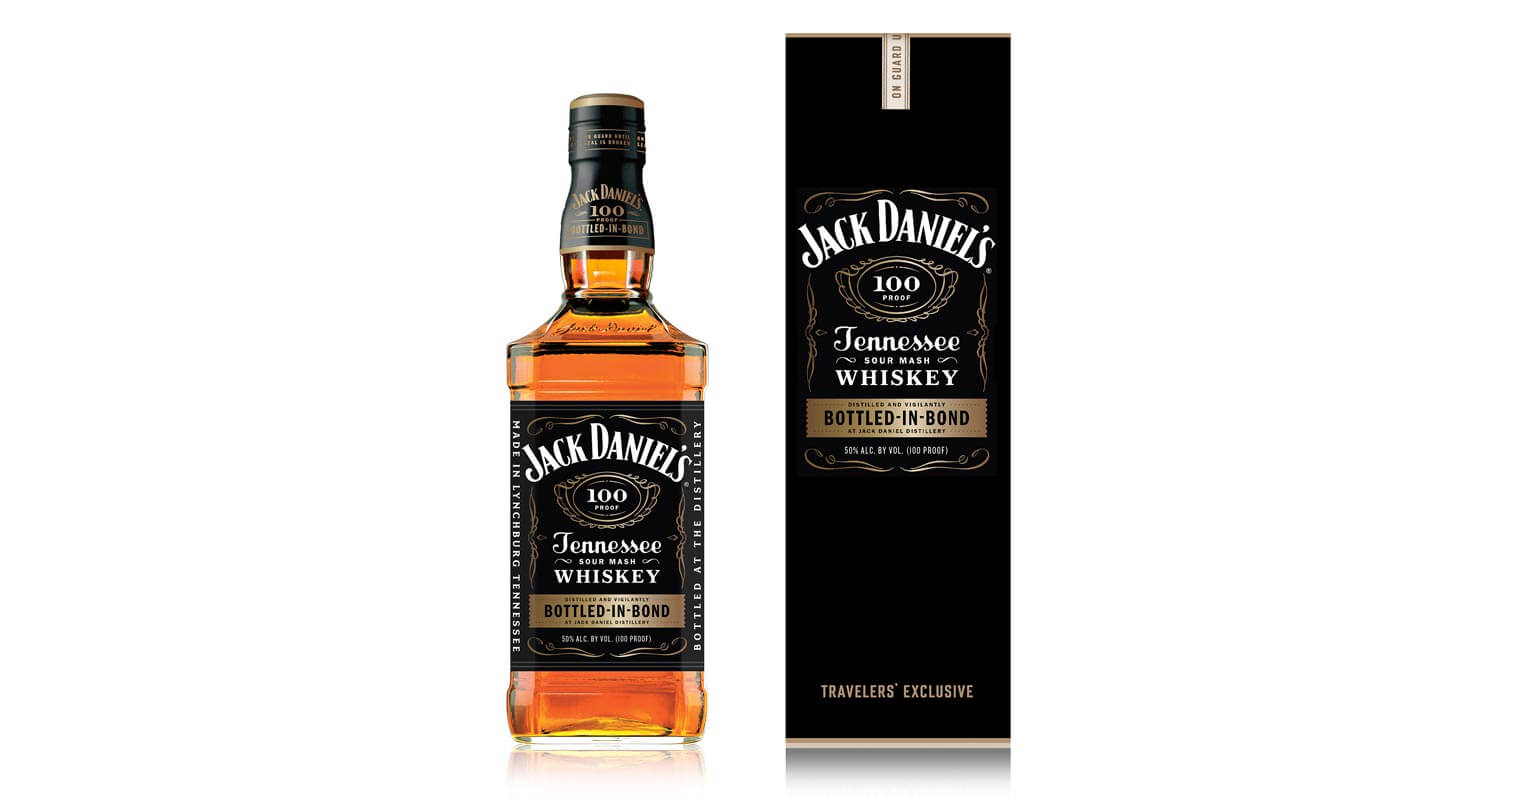 Jack Daniel's Bottled-in-Bond, bottle and package on white, featured image